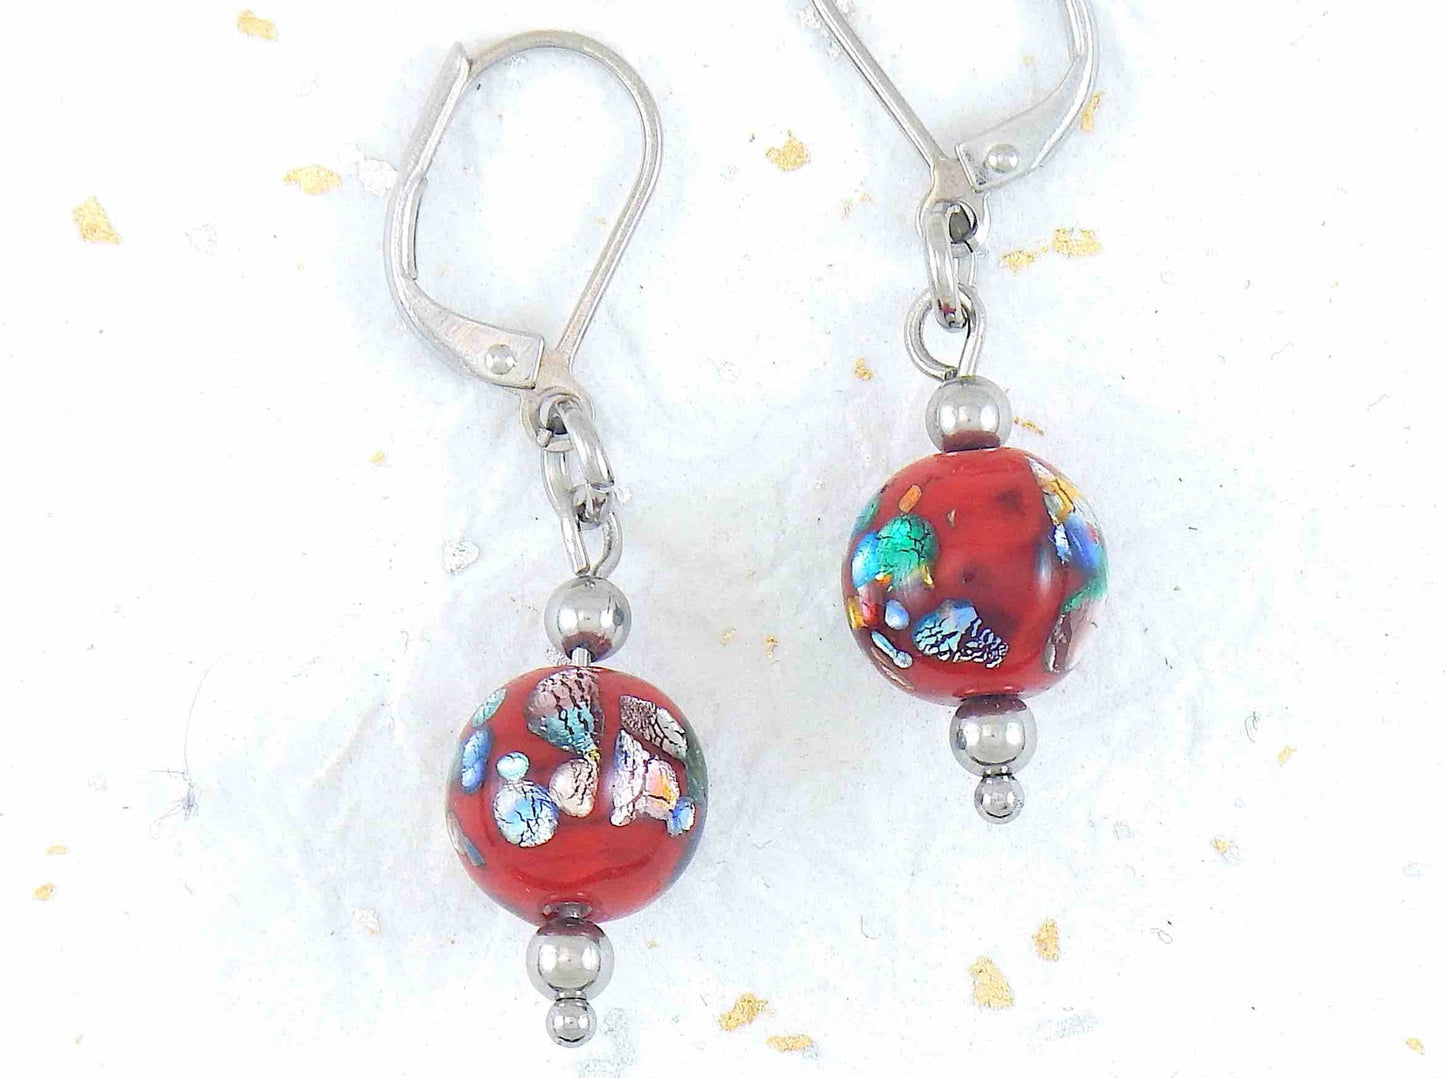 Short earrings with bright red vintage glass balls, metallic silver-yellow-green-blue inclusions, stainless steel lever back hooks